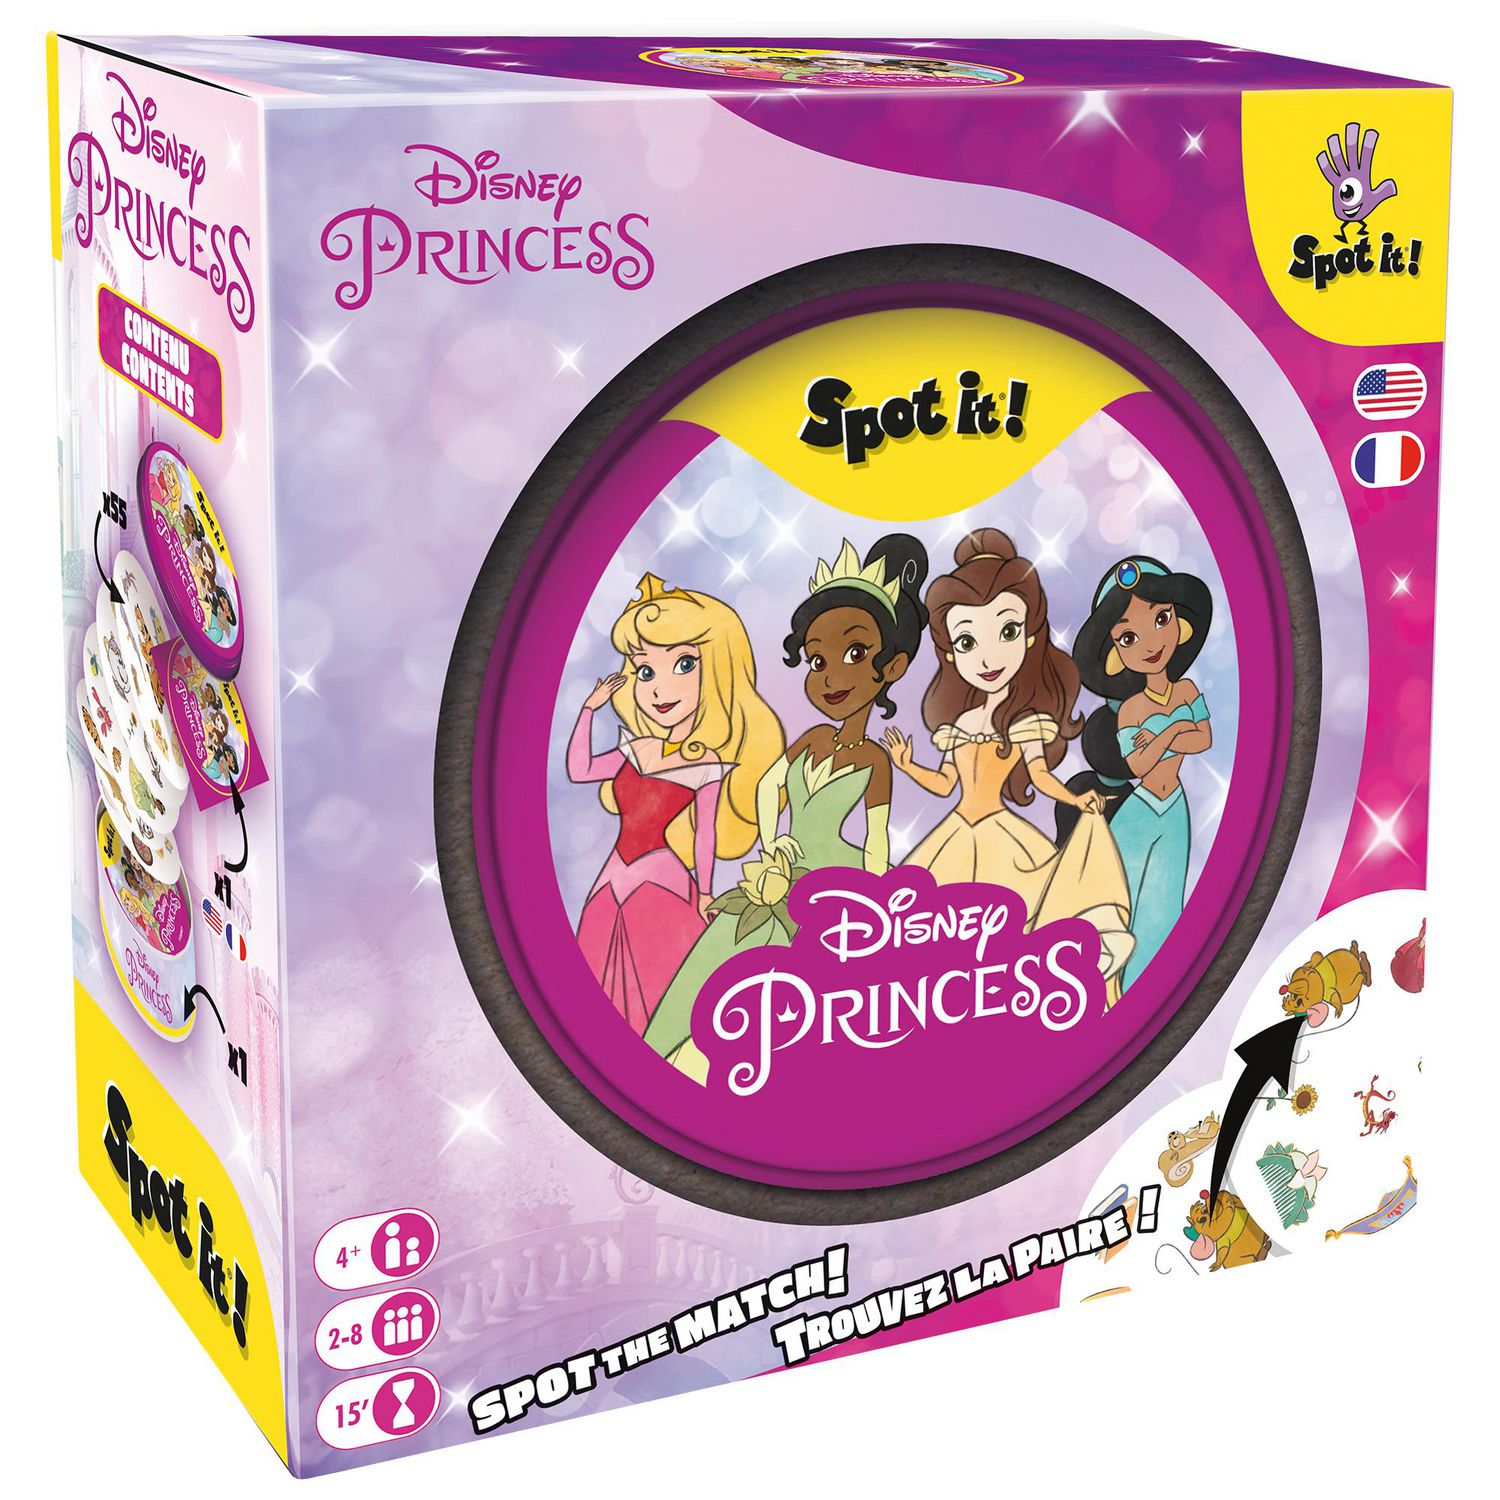 DISNEY Princess Uno In Collectible Tin - Princess Uno In Collectible Tin .  shop for DISNEY products in India.